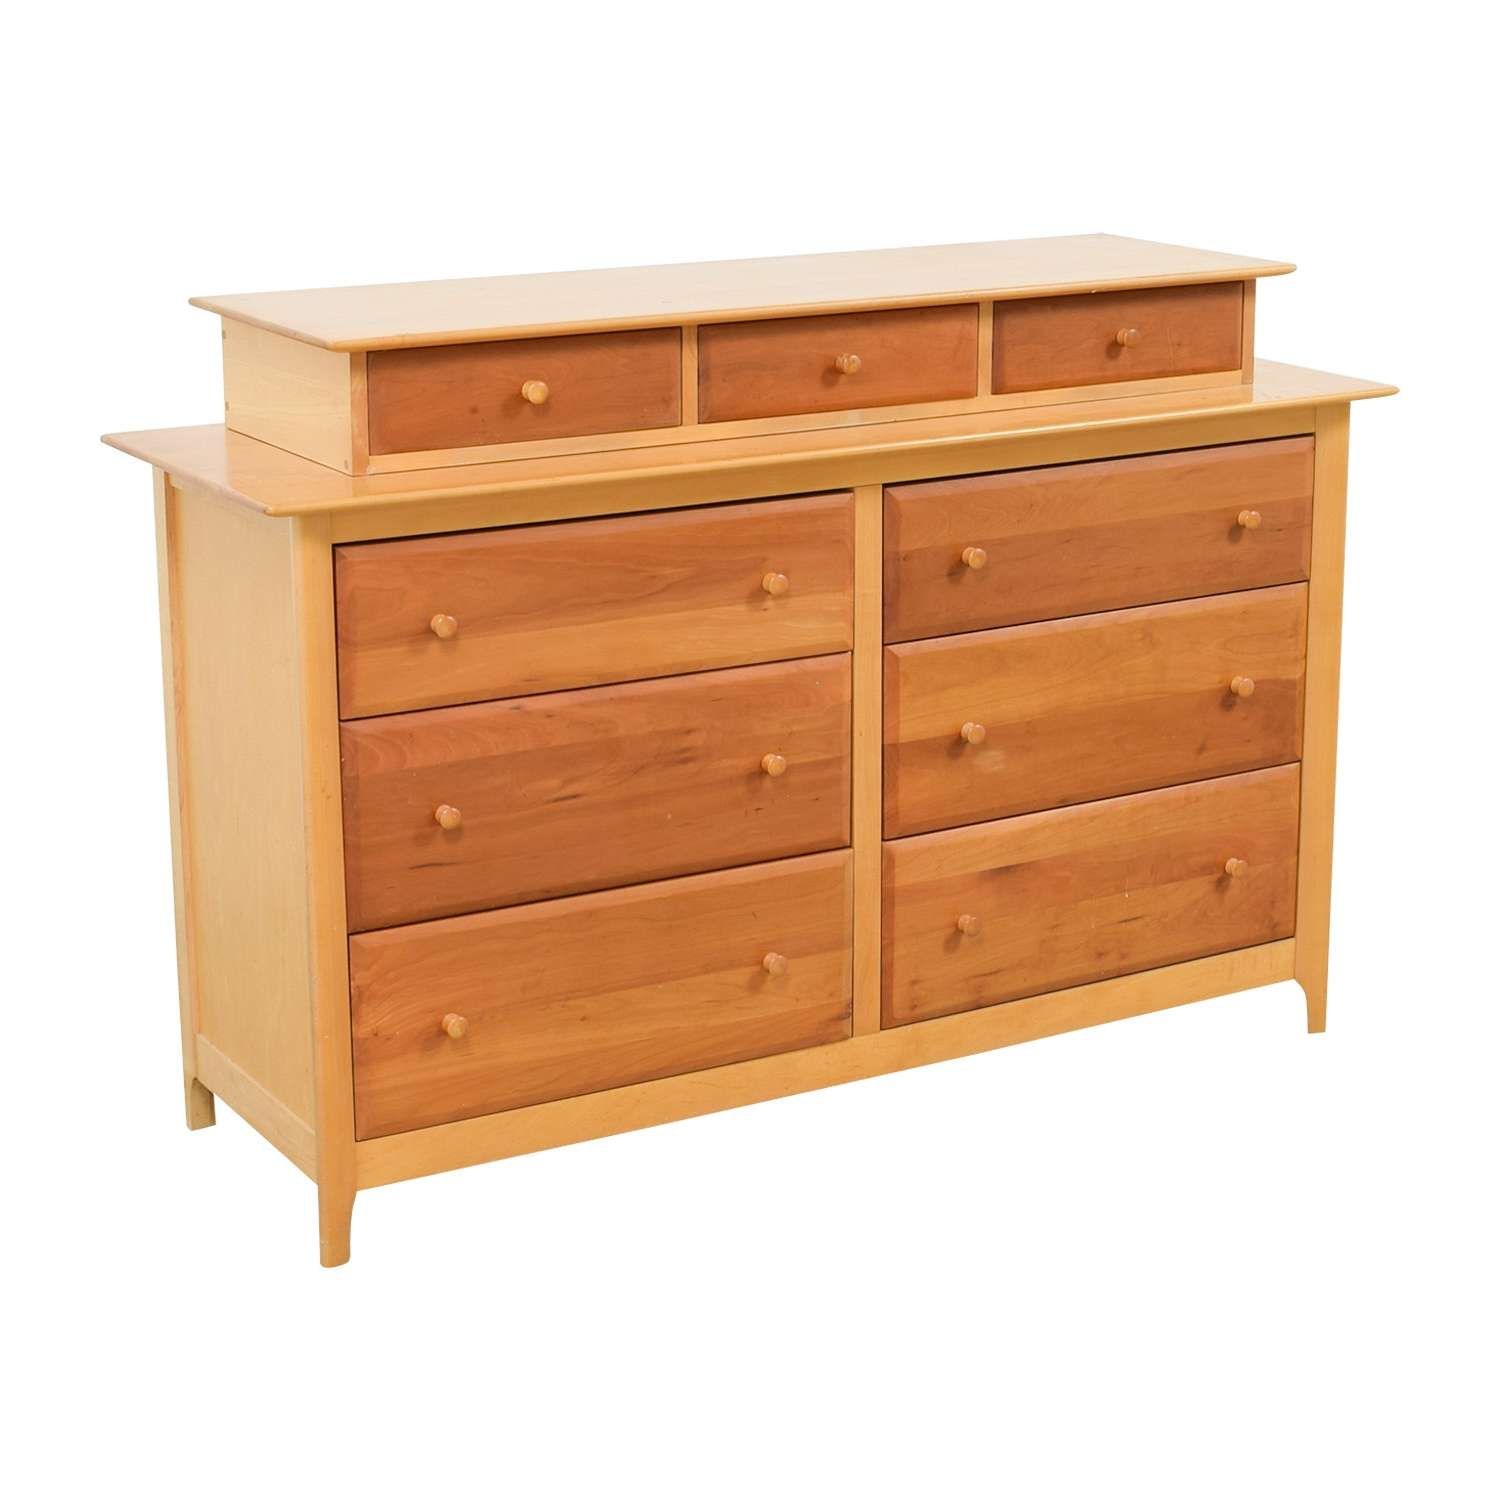 38% Off – Crate & Barrel Crate & Barrel Mid Century Dresser / Storage Regarding Second Hand Dressers And Sideboards (View 12 of 20)